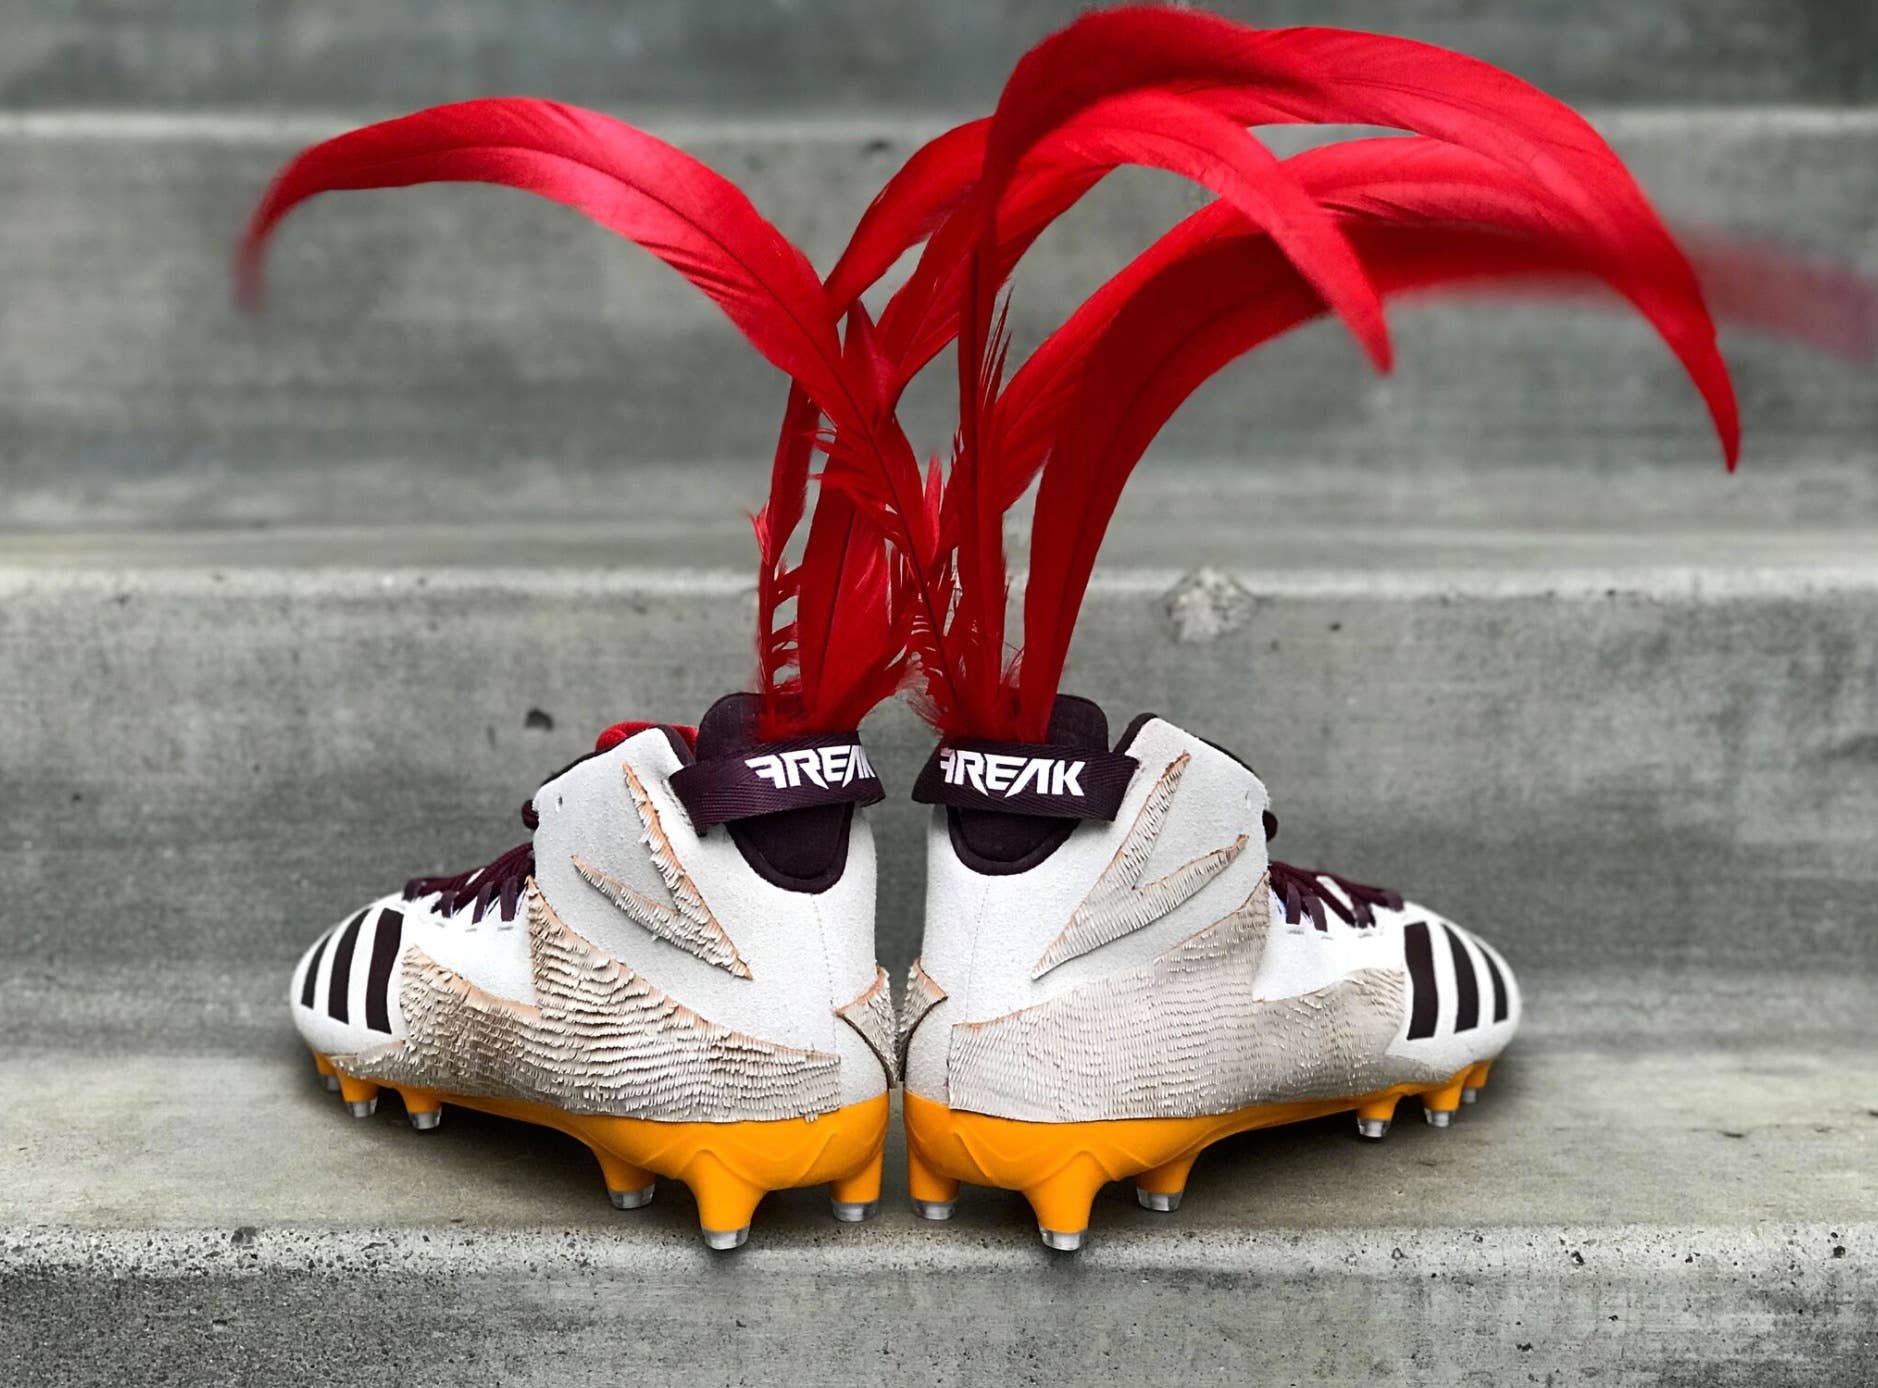 Adidas Freak Cleats Von Miller Year of the Rooster 2